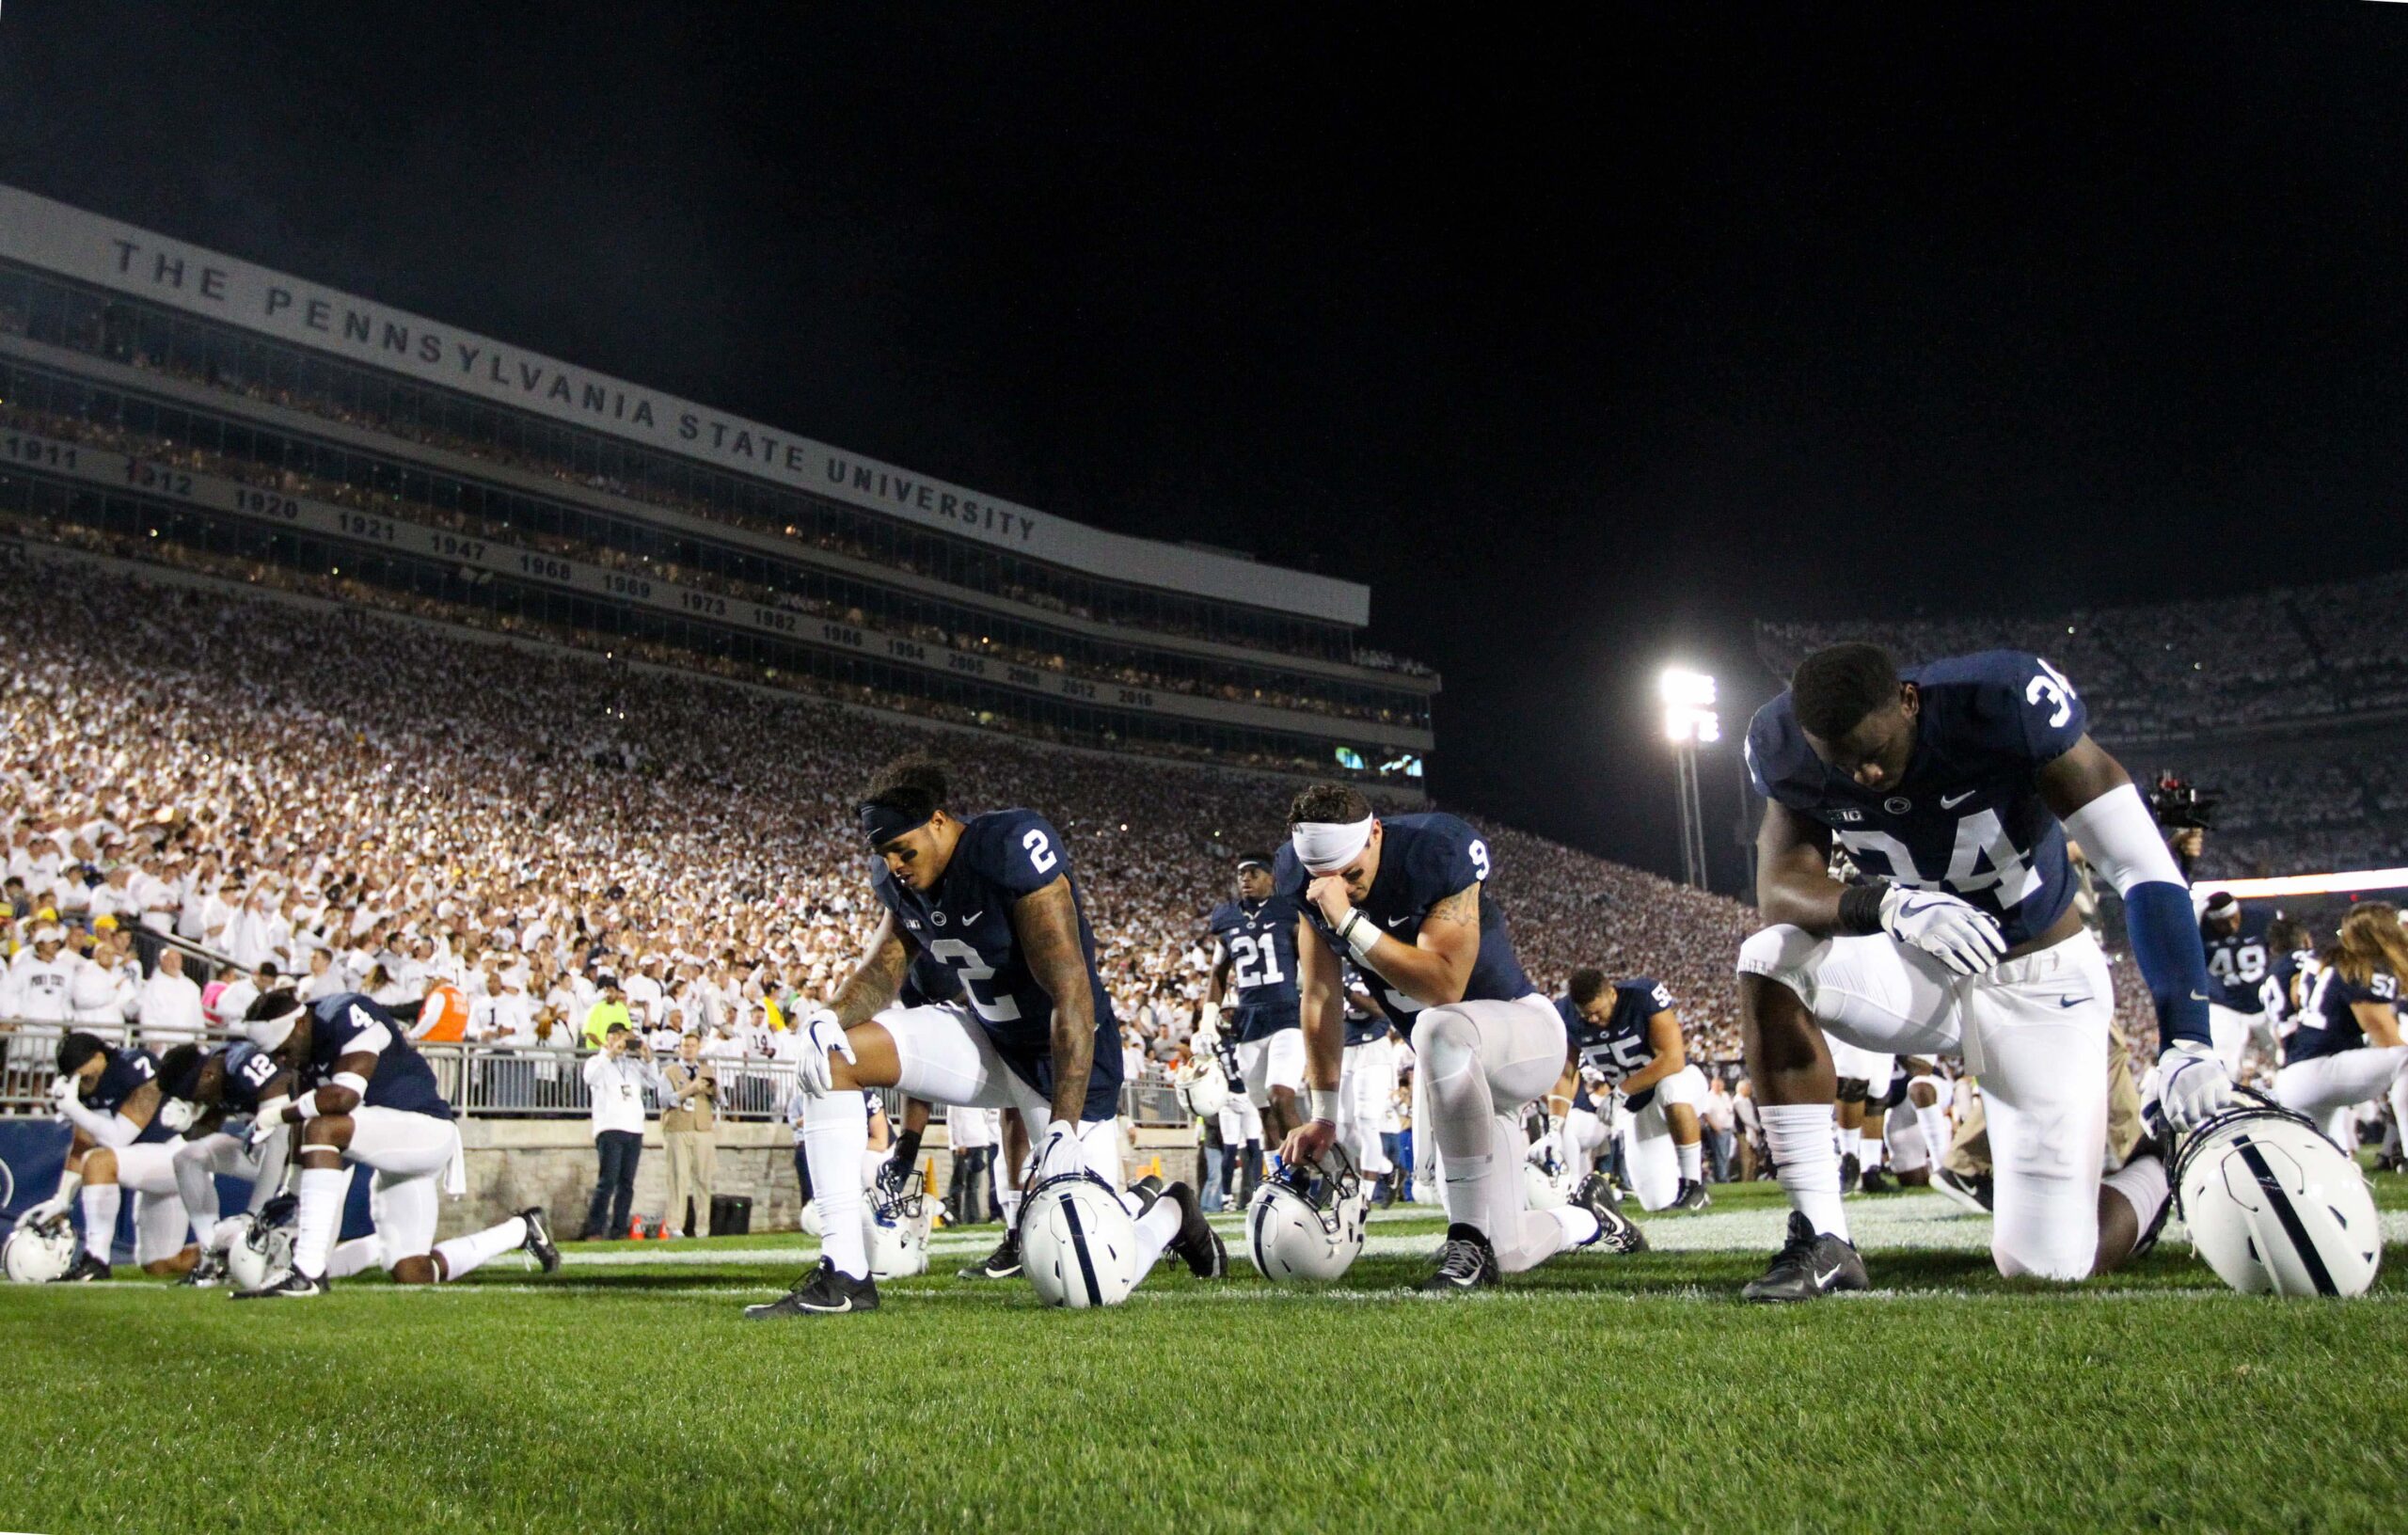 2023 Penn State football schedule, night games